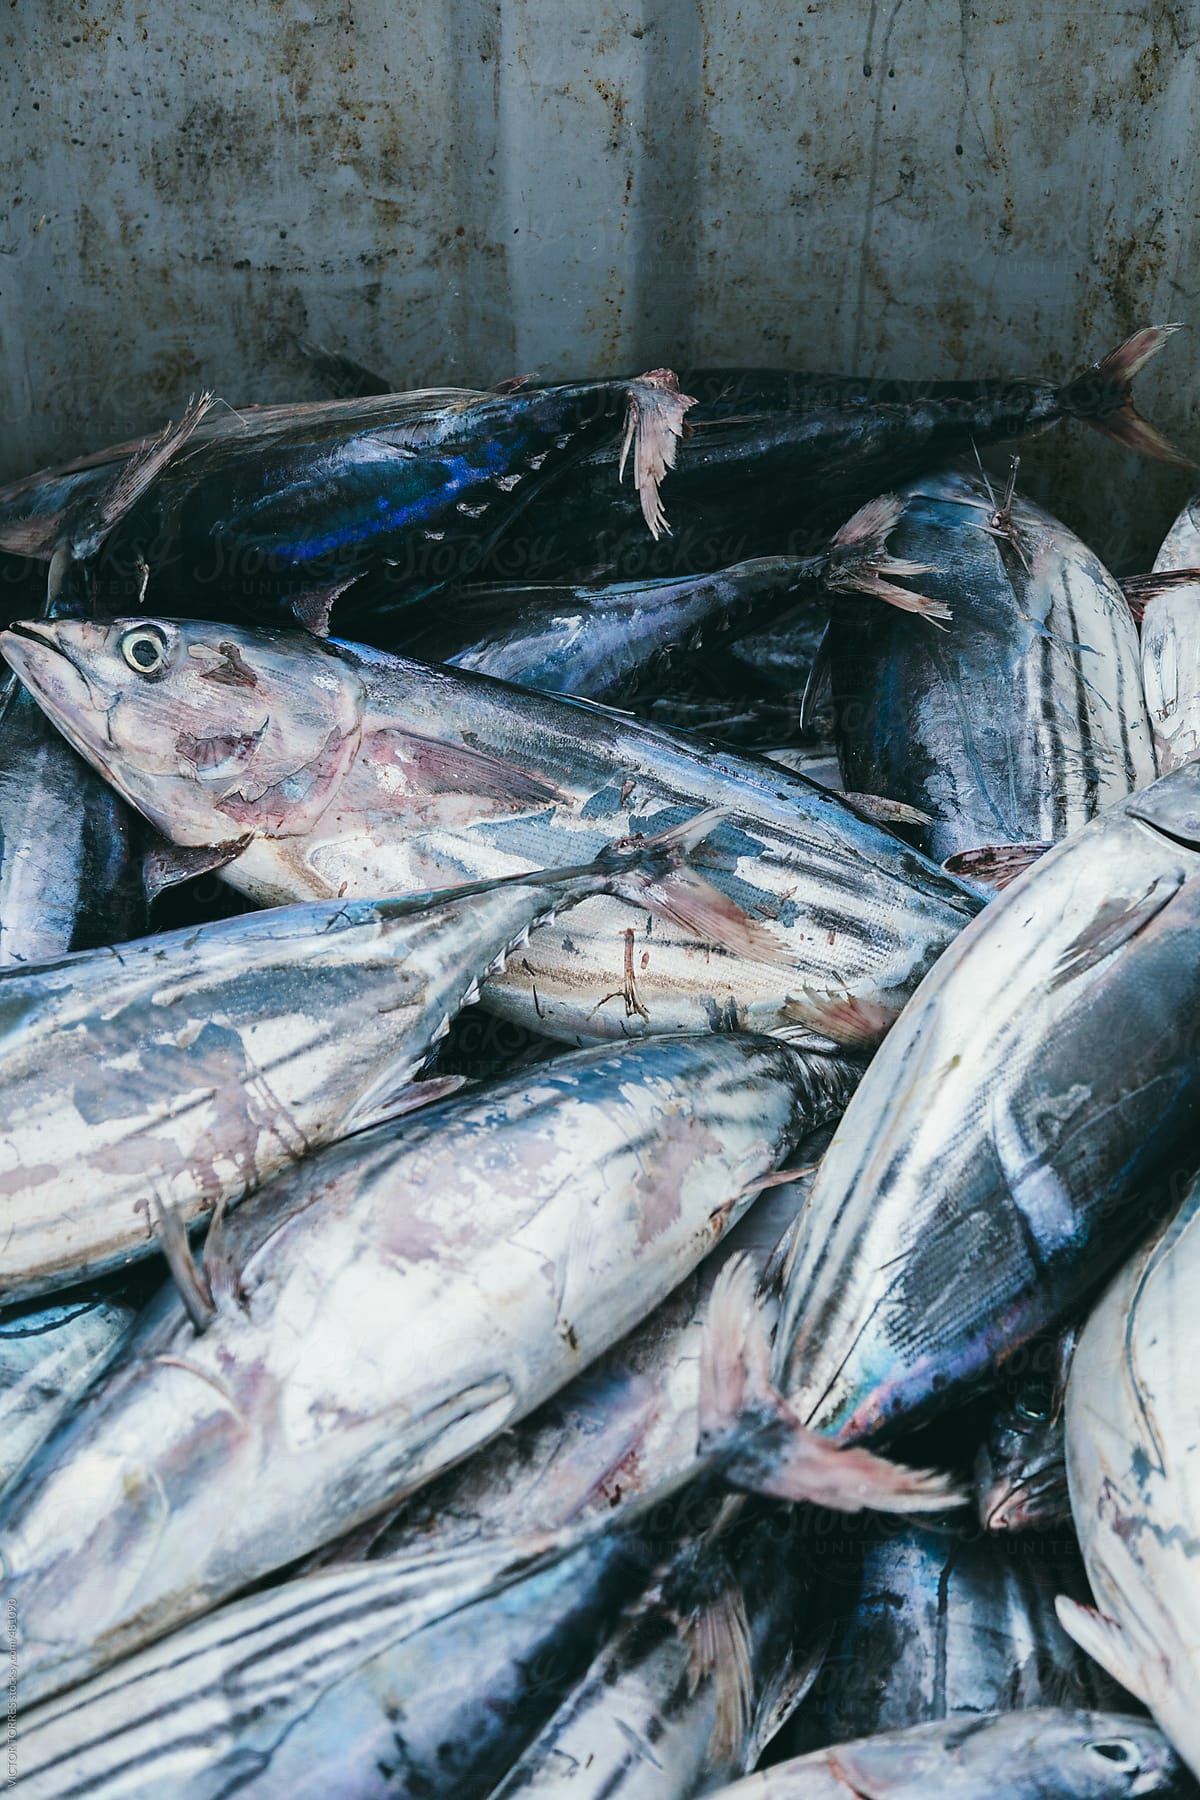 Fishermans in Fish Market with Fresh Tunas